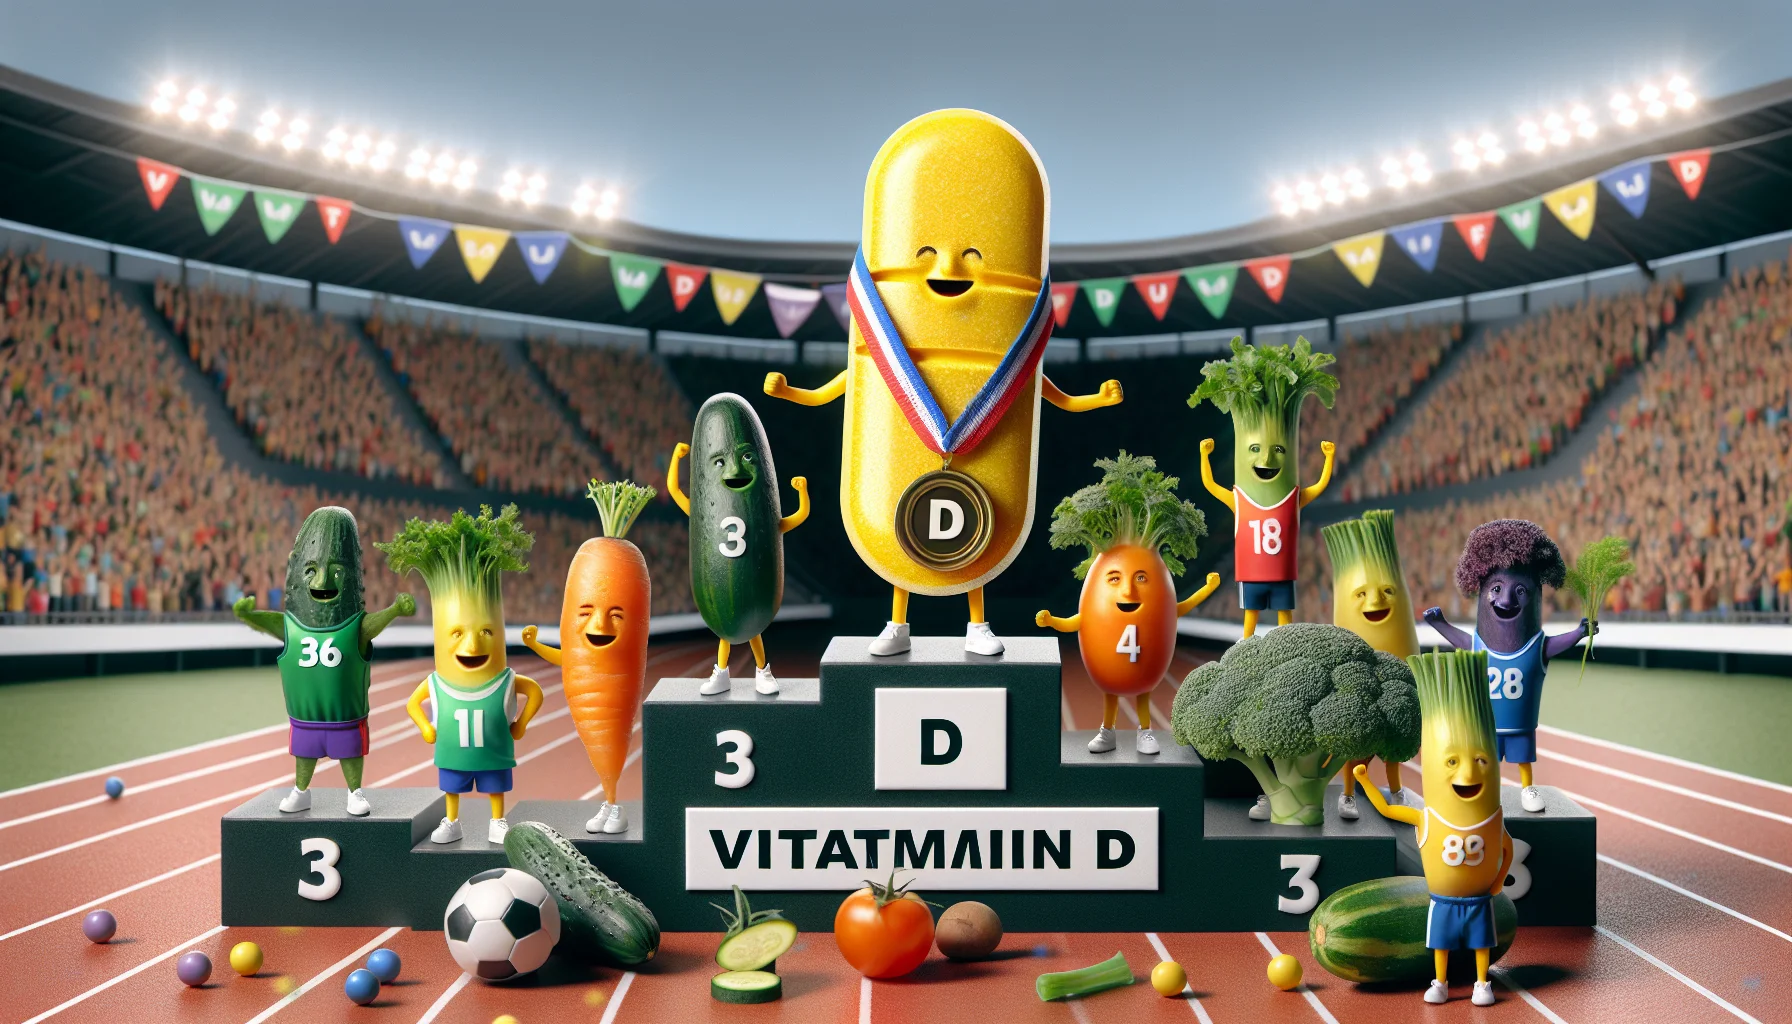 Create an image that presents Wellements Vitamin D in a lighthearted and humorous context, aimed at encouraging individuals to consider nutritional supplements for their athletic activities. Picture this: A sports stadium filled with vegetables donning miniature athletic apparel, engaged in various sports activities. Among this group, there's a radiant sunshine-yellow Vitamin D pill proudly wearing a number 'D' jersey, standing atop a winner's podium with a medal around its 'neck'. The vegetables, symbolic of different sports players, are applauding and the background contains banners encouraging the use of supplements for enhanced sports performance.